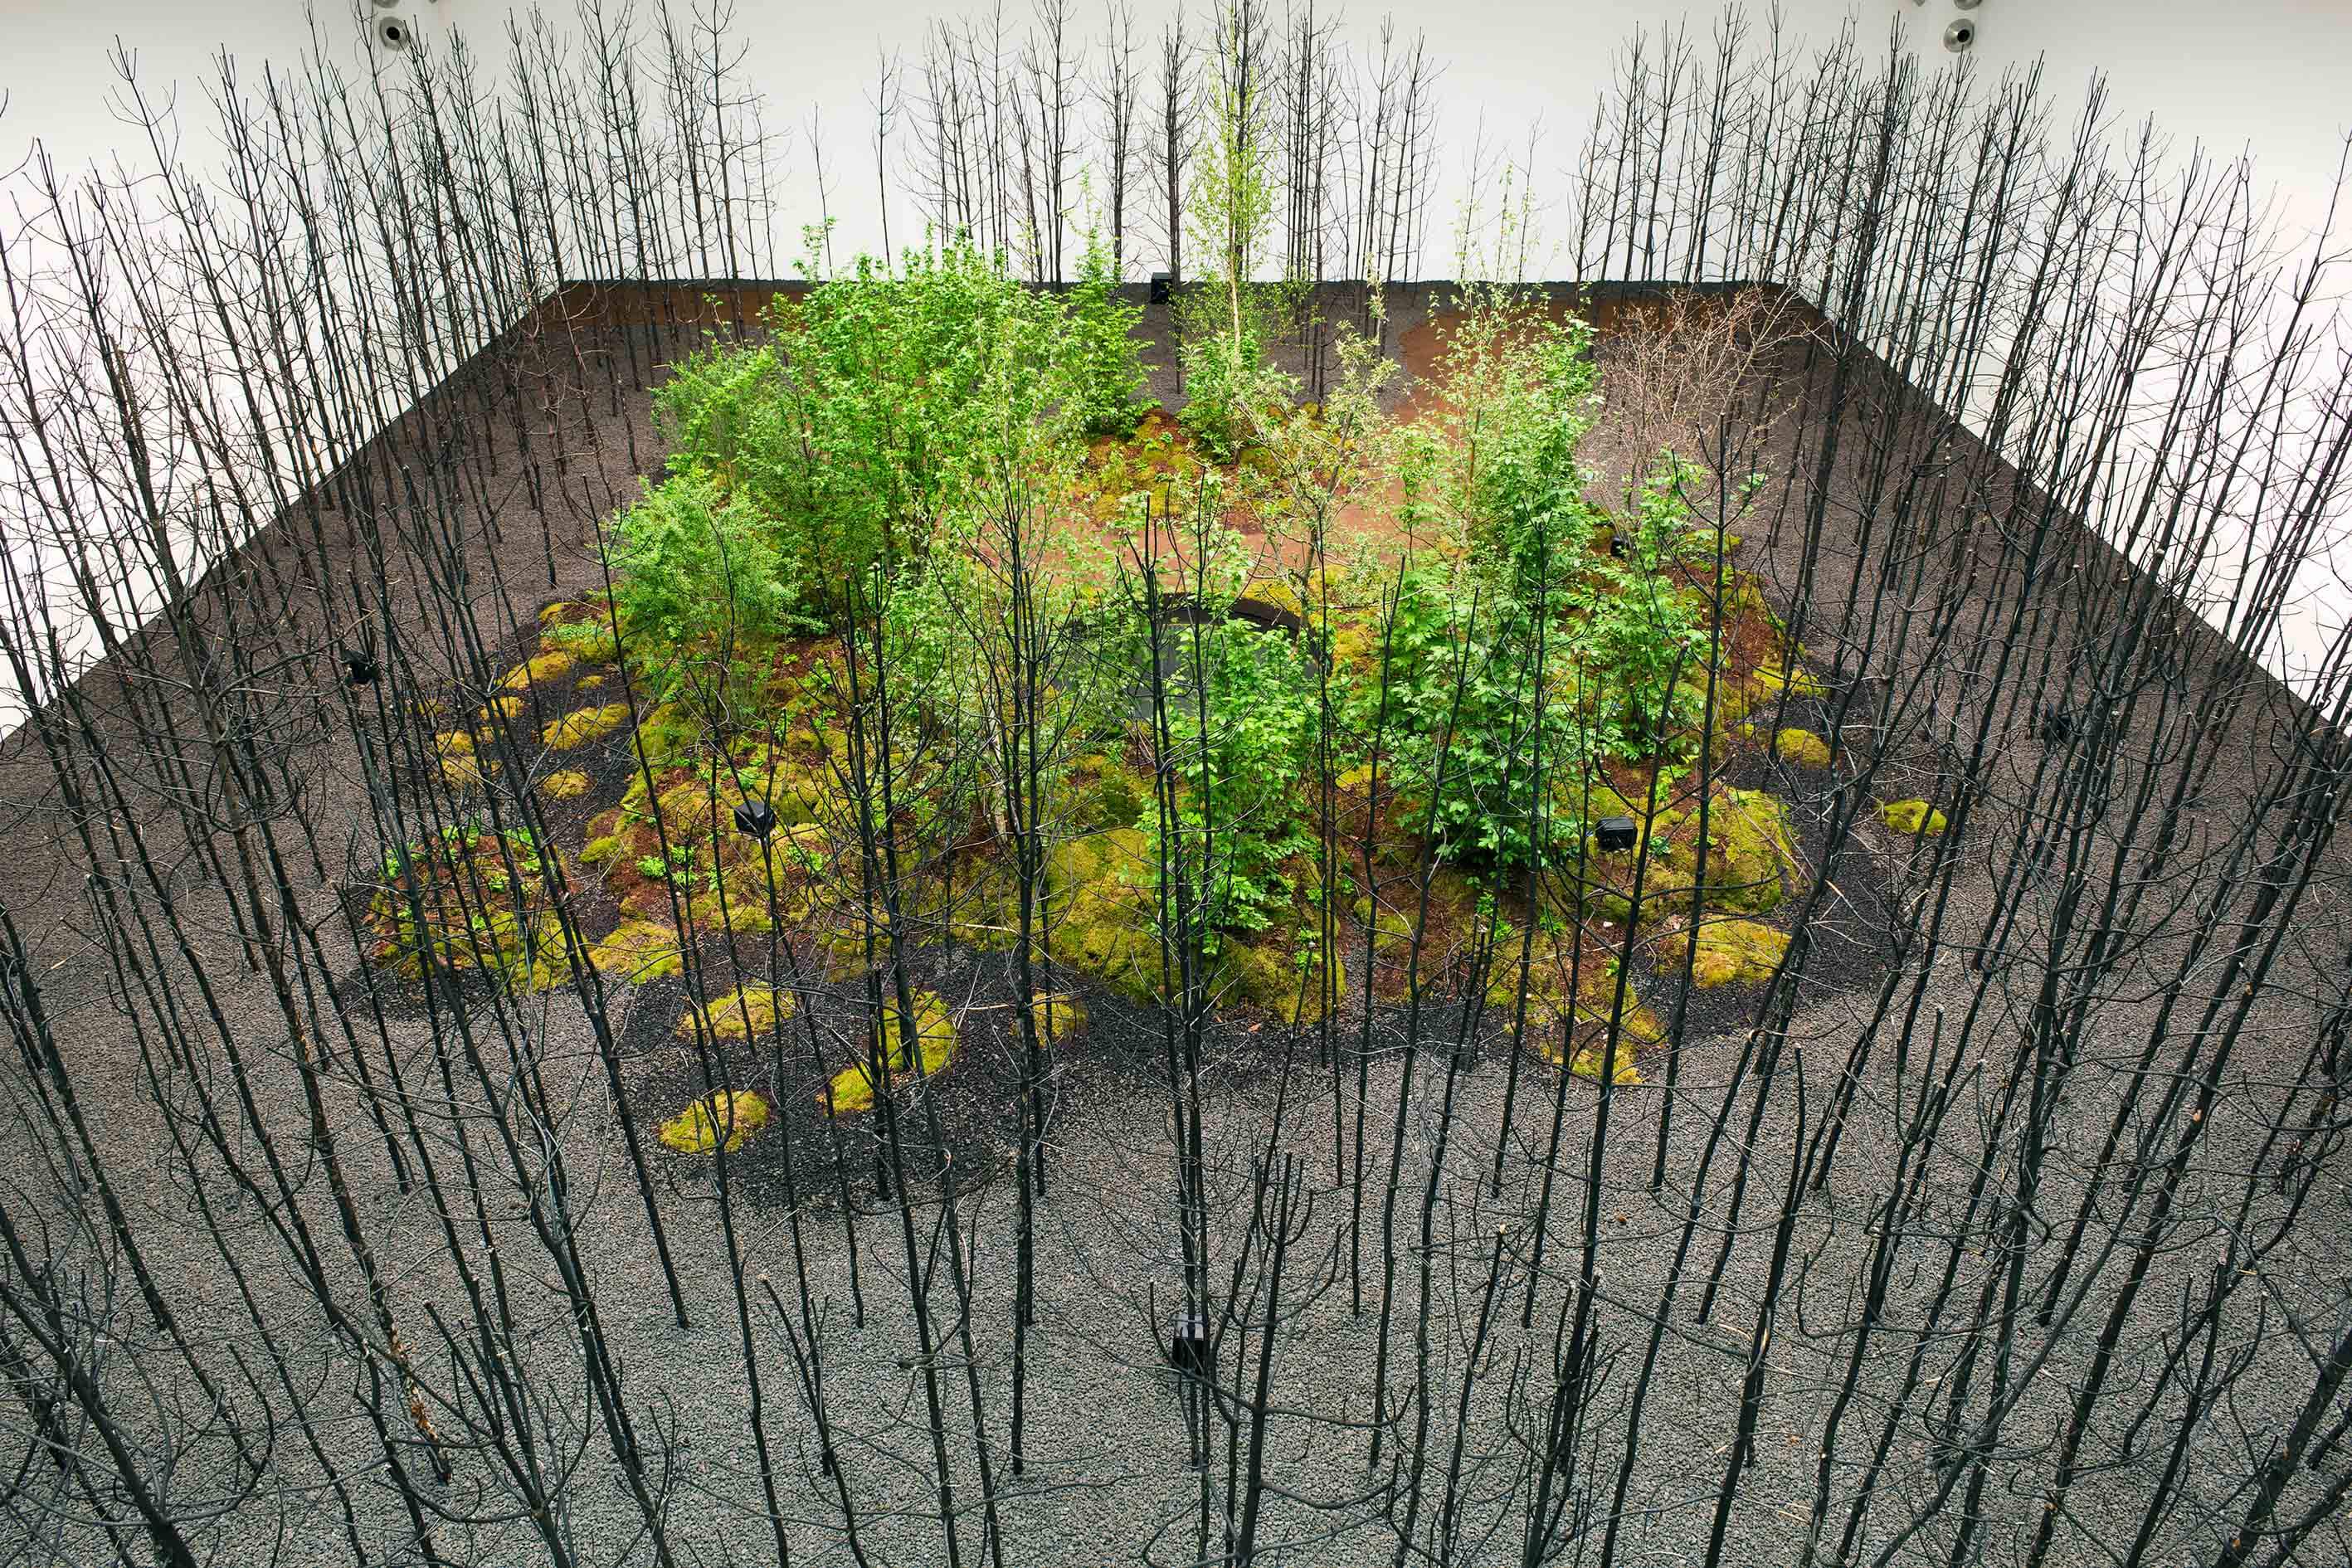 A forest established inside a white walled gallery